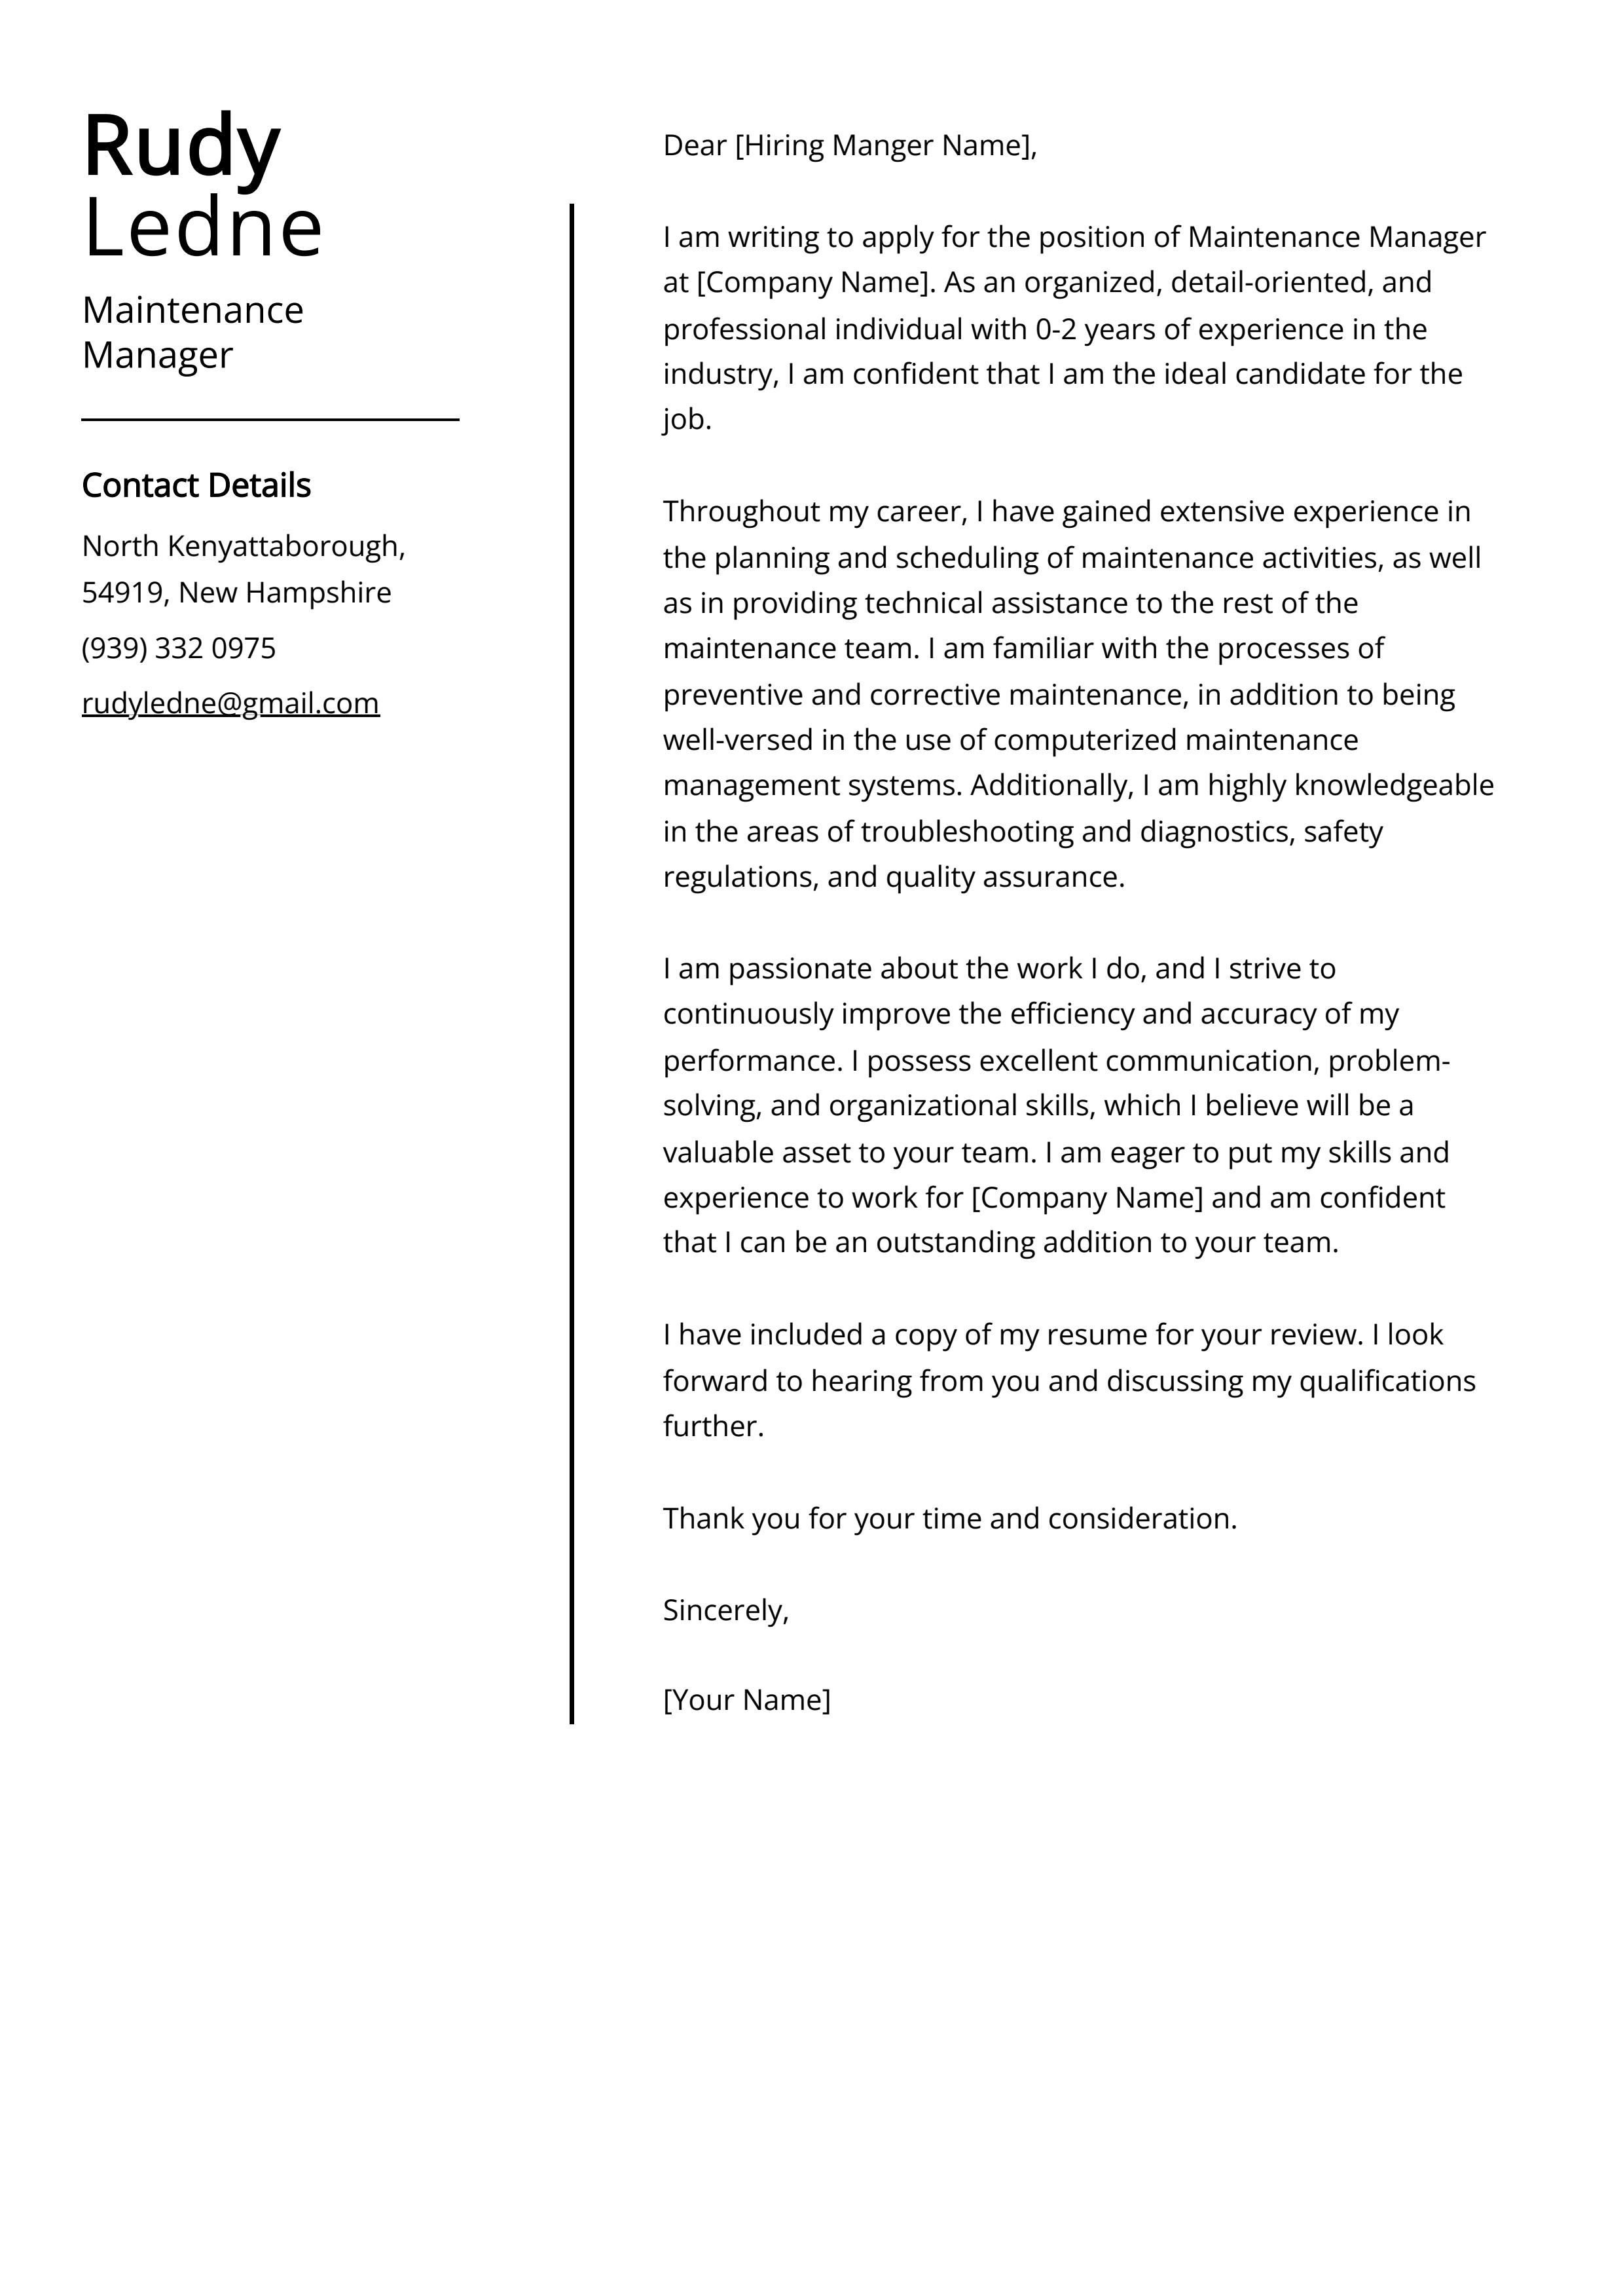 Maintenance Manager Cover Letter Example